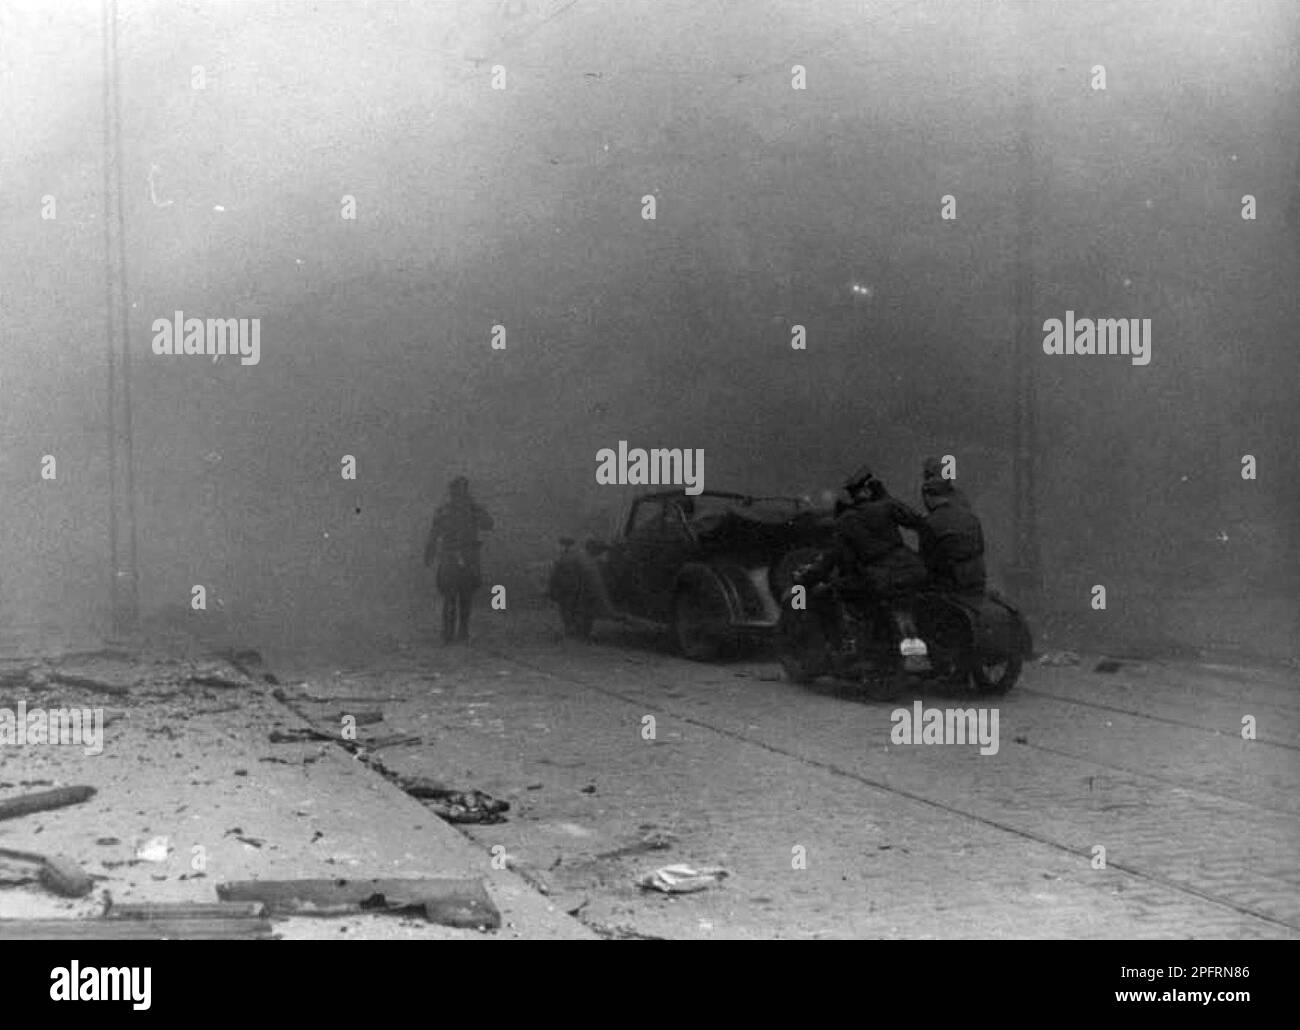 In January 1943 the nazis arrived to round up the Jews of the Warsaw Ghetto  The Jews, resolved to fight it out, took on the SS with homemade and primitive weapons. The defenders were executed or deported and the Ghetto area was systematically demolished. This event is known as The Ghetto Uprising. This image shows a German car and notor bike lost in thick smoke on Zamenhofa Street. This image is from the German photographic record of the event, known as the Stroop report. Stock Photo